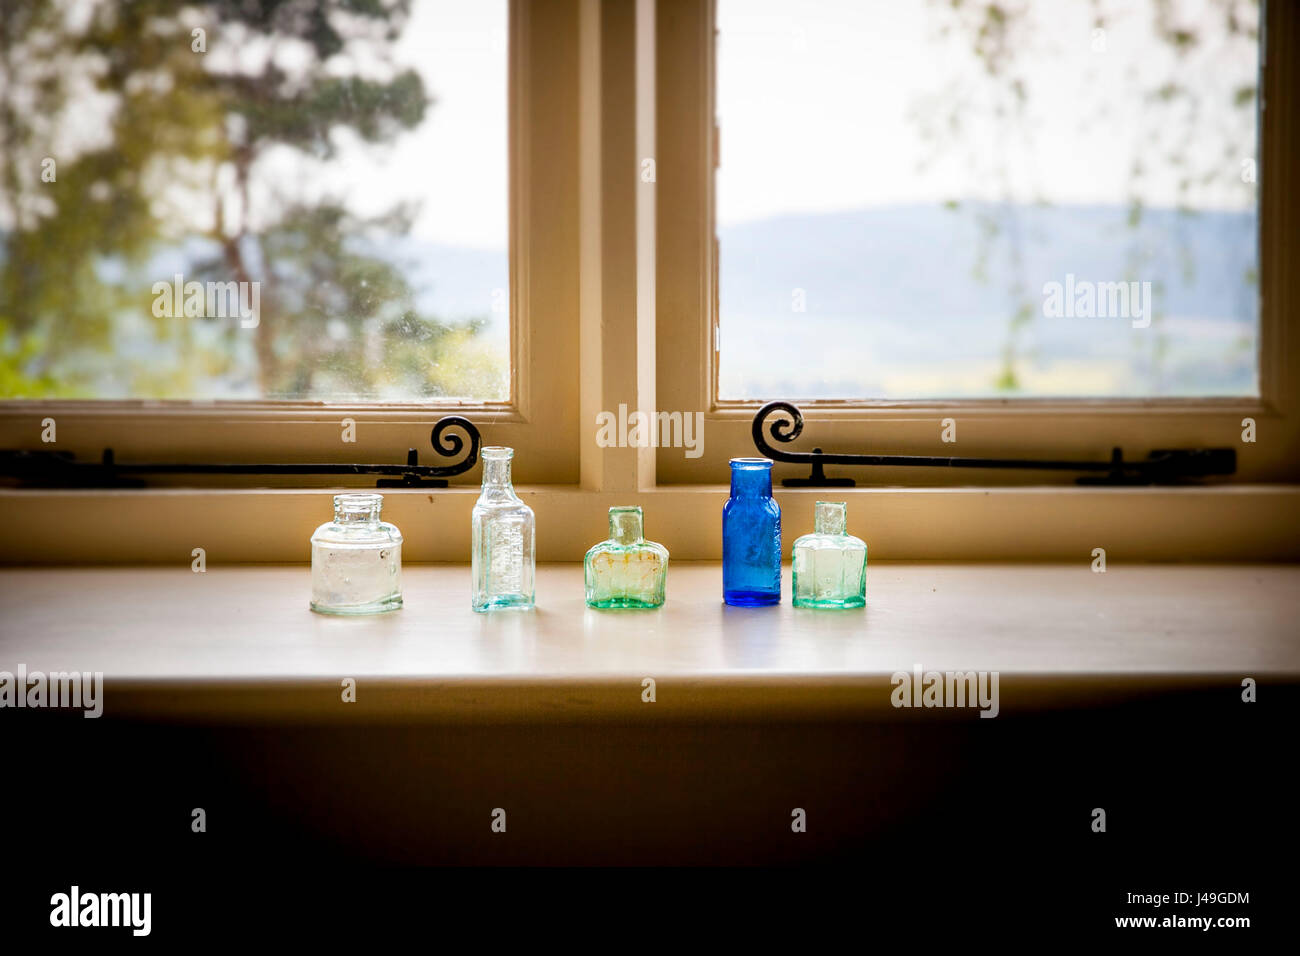 Refined country living - Five stylish little glass bottles sitting on a window sill Stock Photo